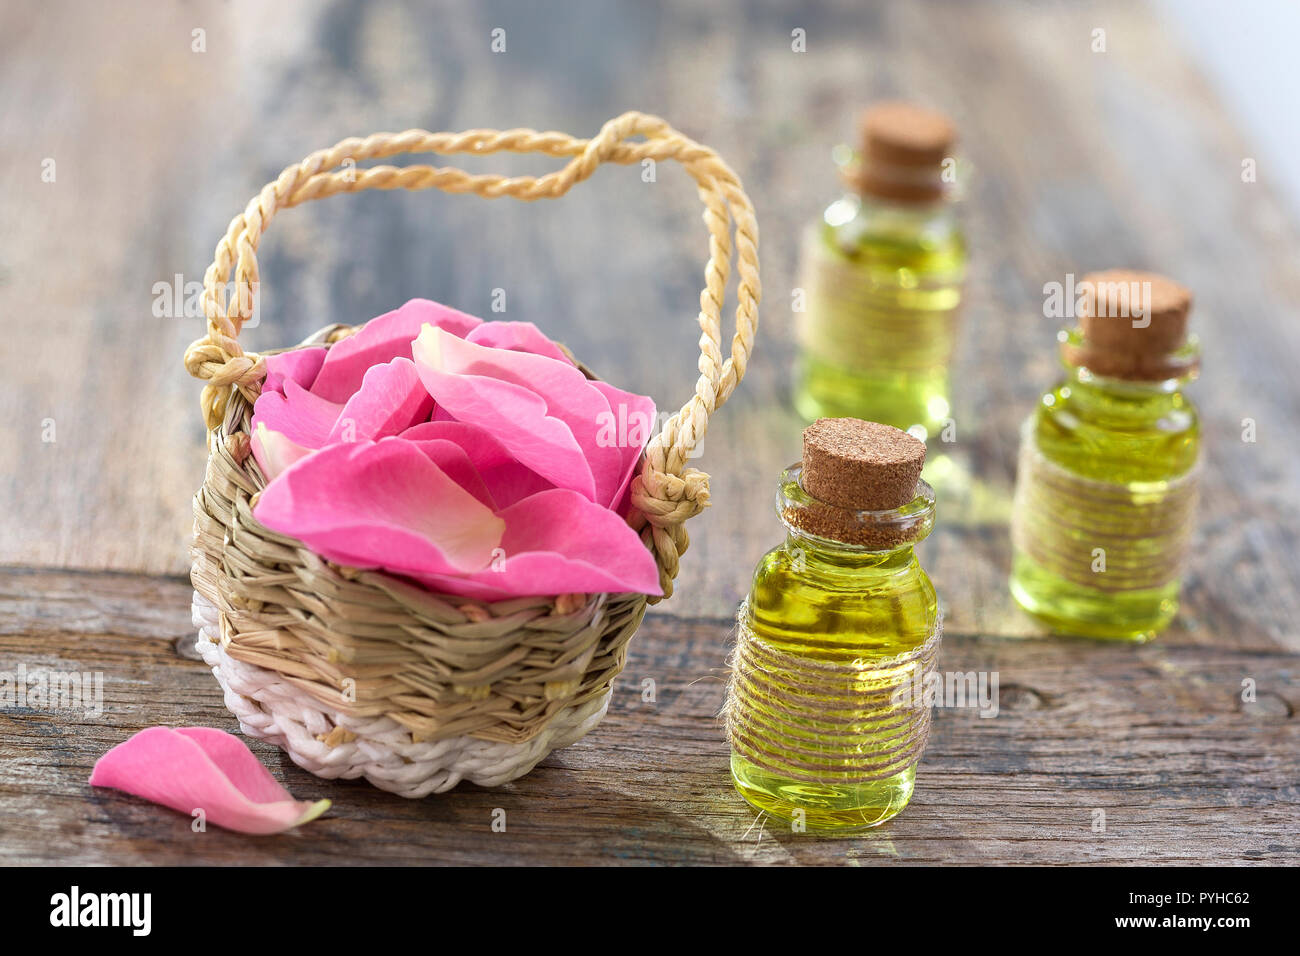 Rustic wicker basket with pink rose hip flowers and bottles of essential roses oil on wooden background Stock Photo